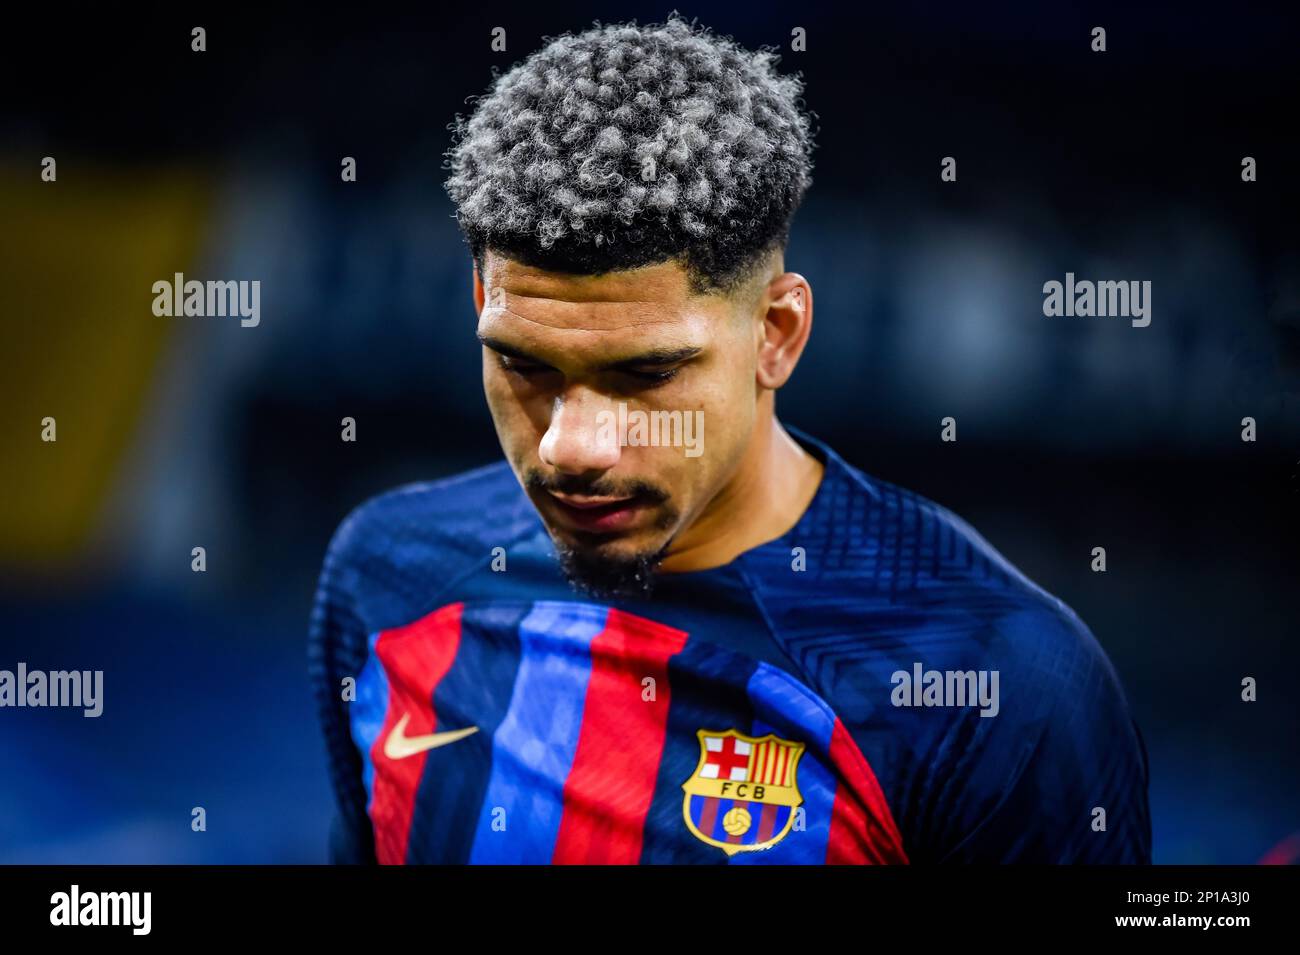 Ronald Araujo (Barcelona) before the football match between&#xA;Real Madrid and Barcelona valid for the semifinal of the “Copa del Rey” Spanish cup ce Stock Photo